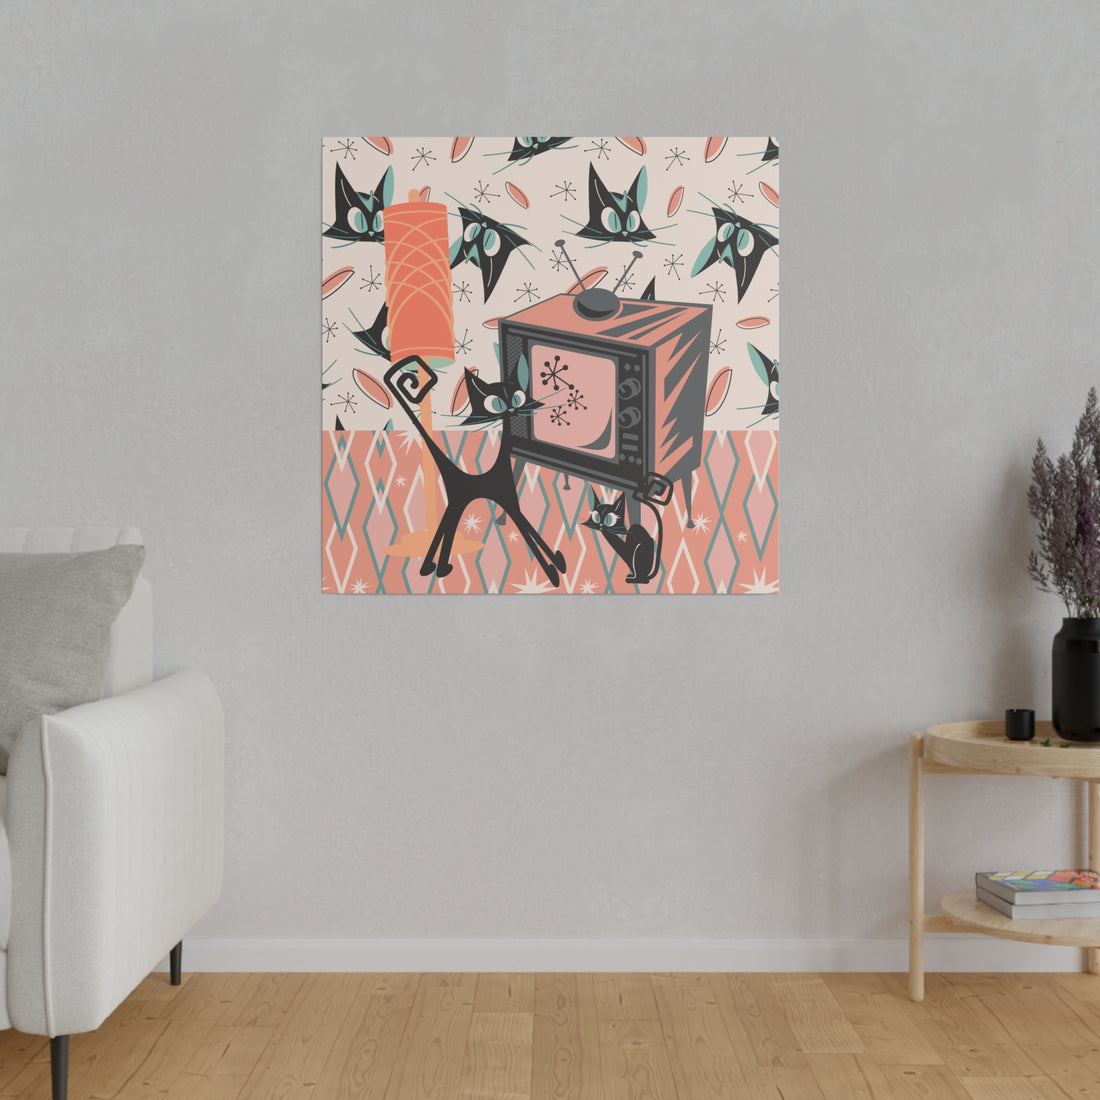 Atomic Cat Art, Quirky, Kitschy Whimsical Kittie Lover, Retro TV, Coral, Peach, Teal Blue, Mid Century Modern Wall Art